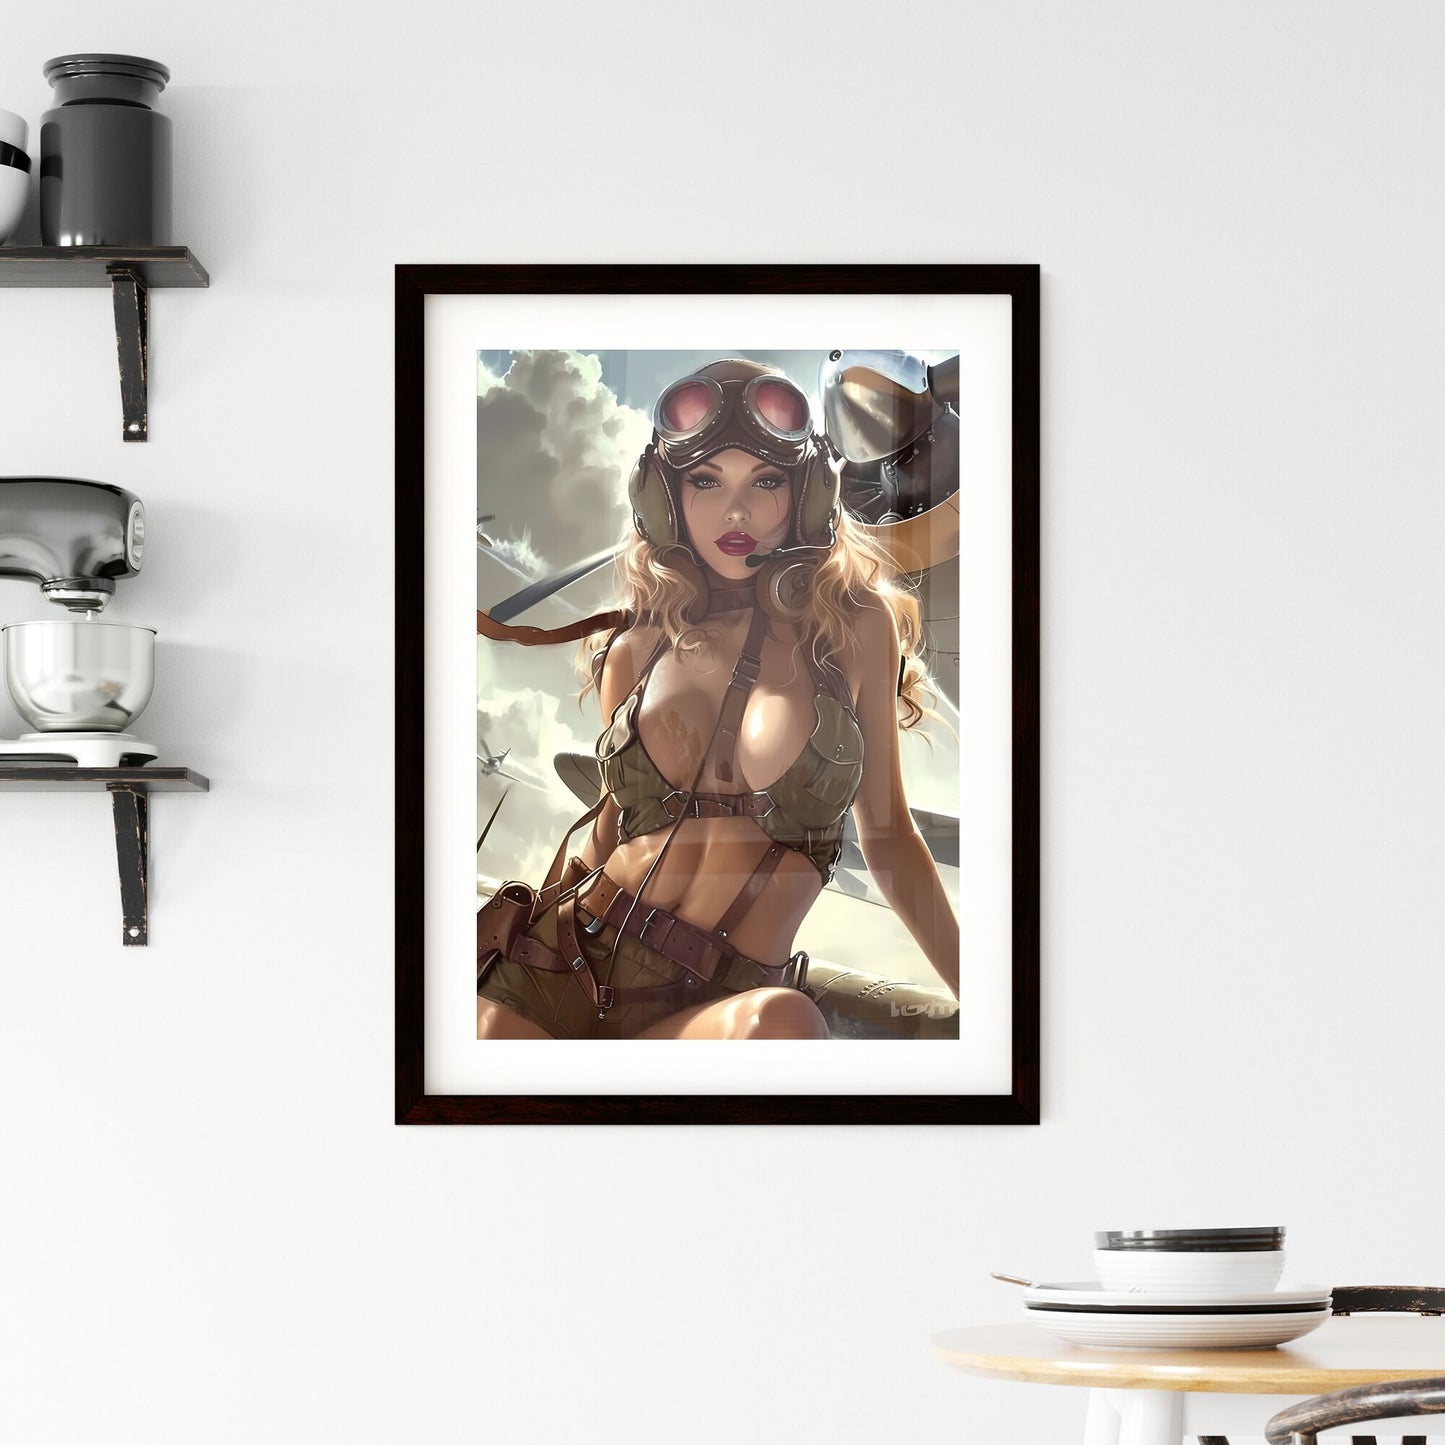 Gogo girl hyper realism style - Art print of a woman in a military uniform Default Title